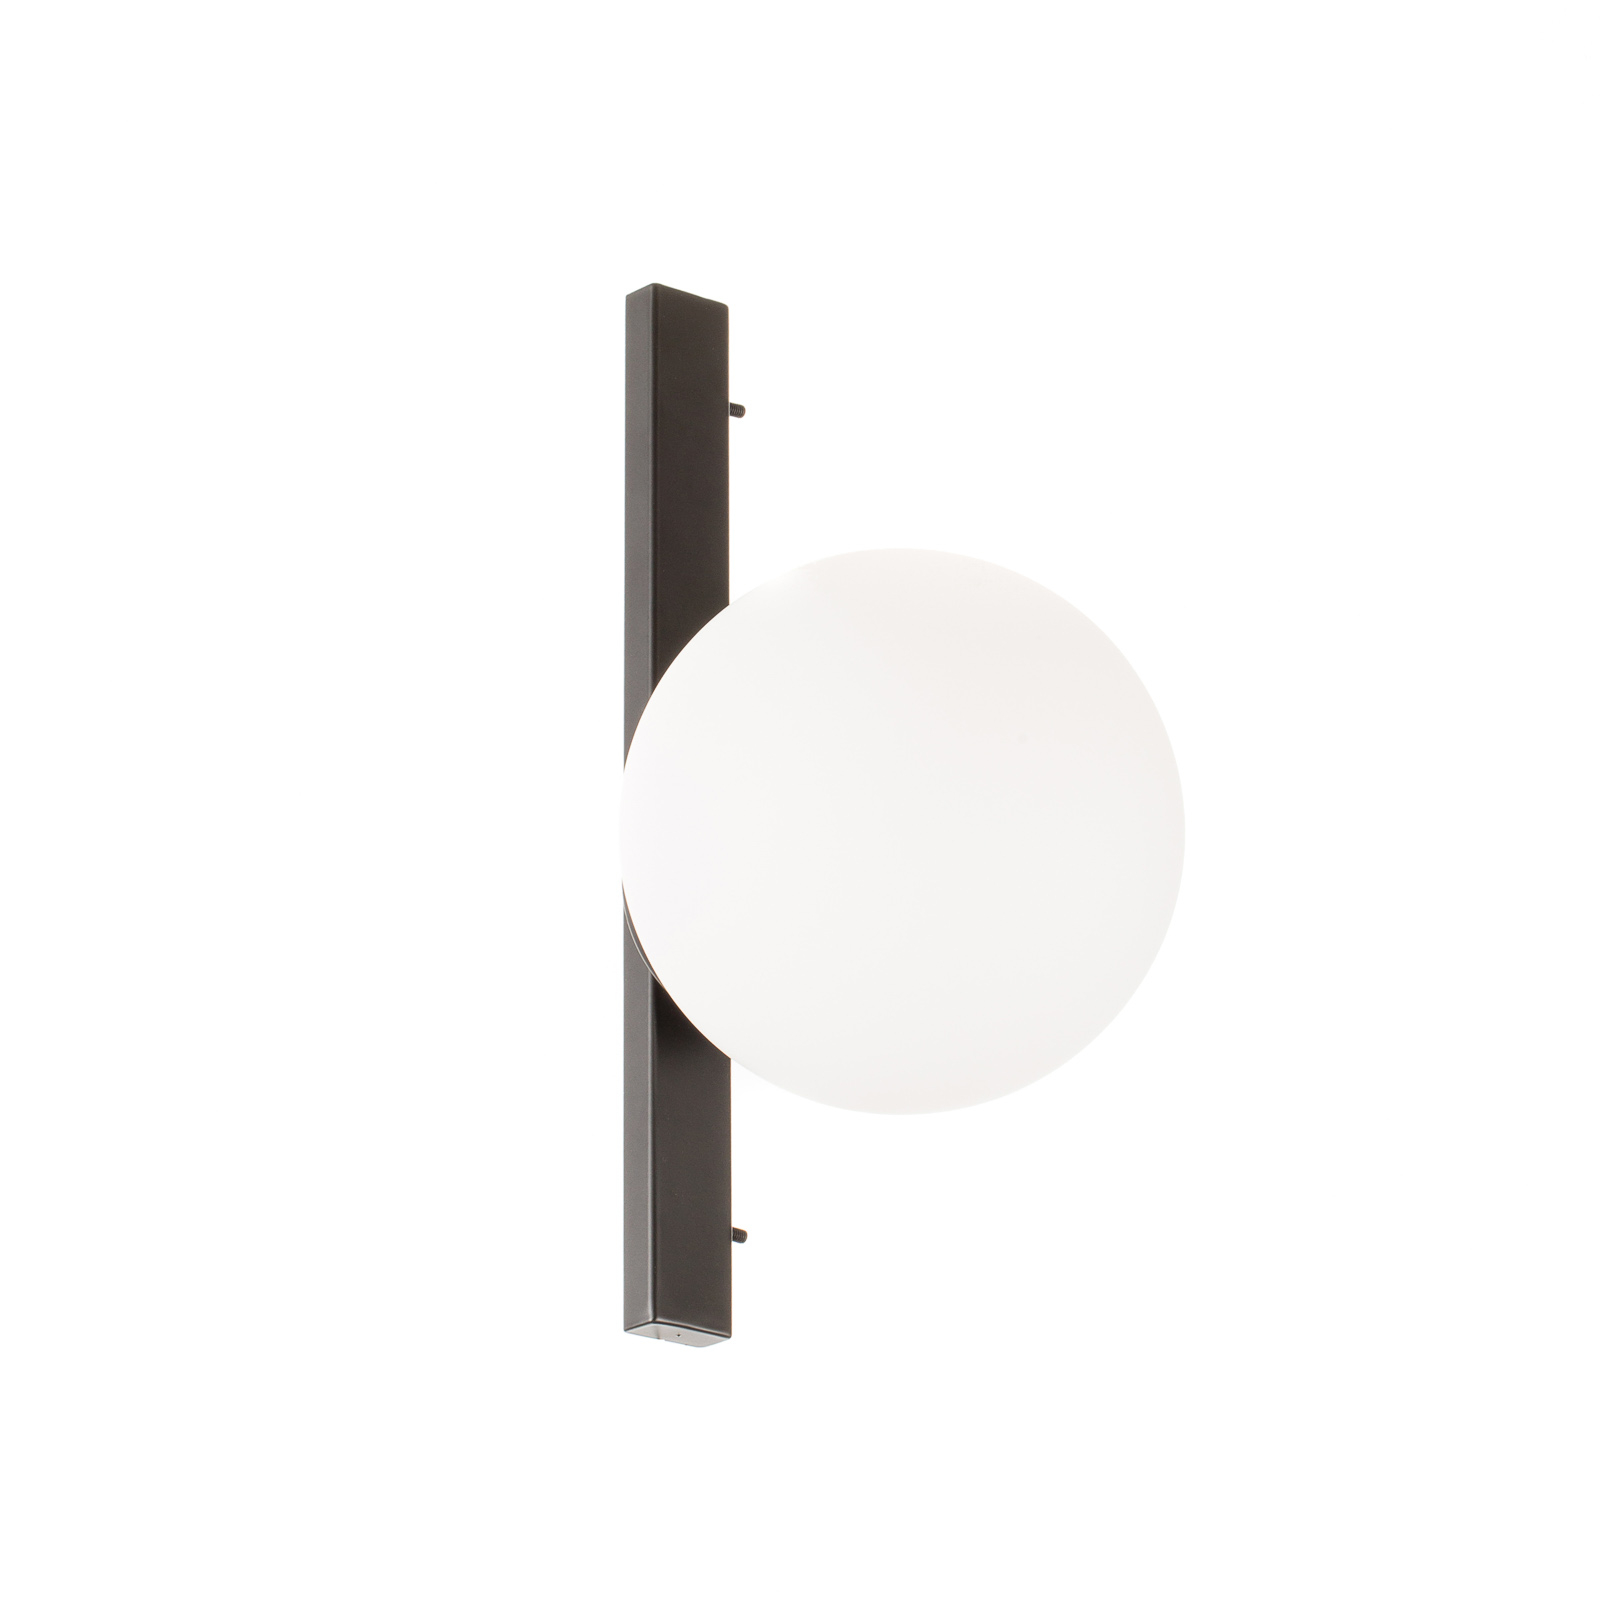 Pluto wall light in black and white, 1-bulb